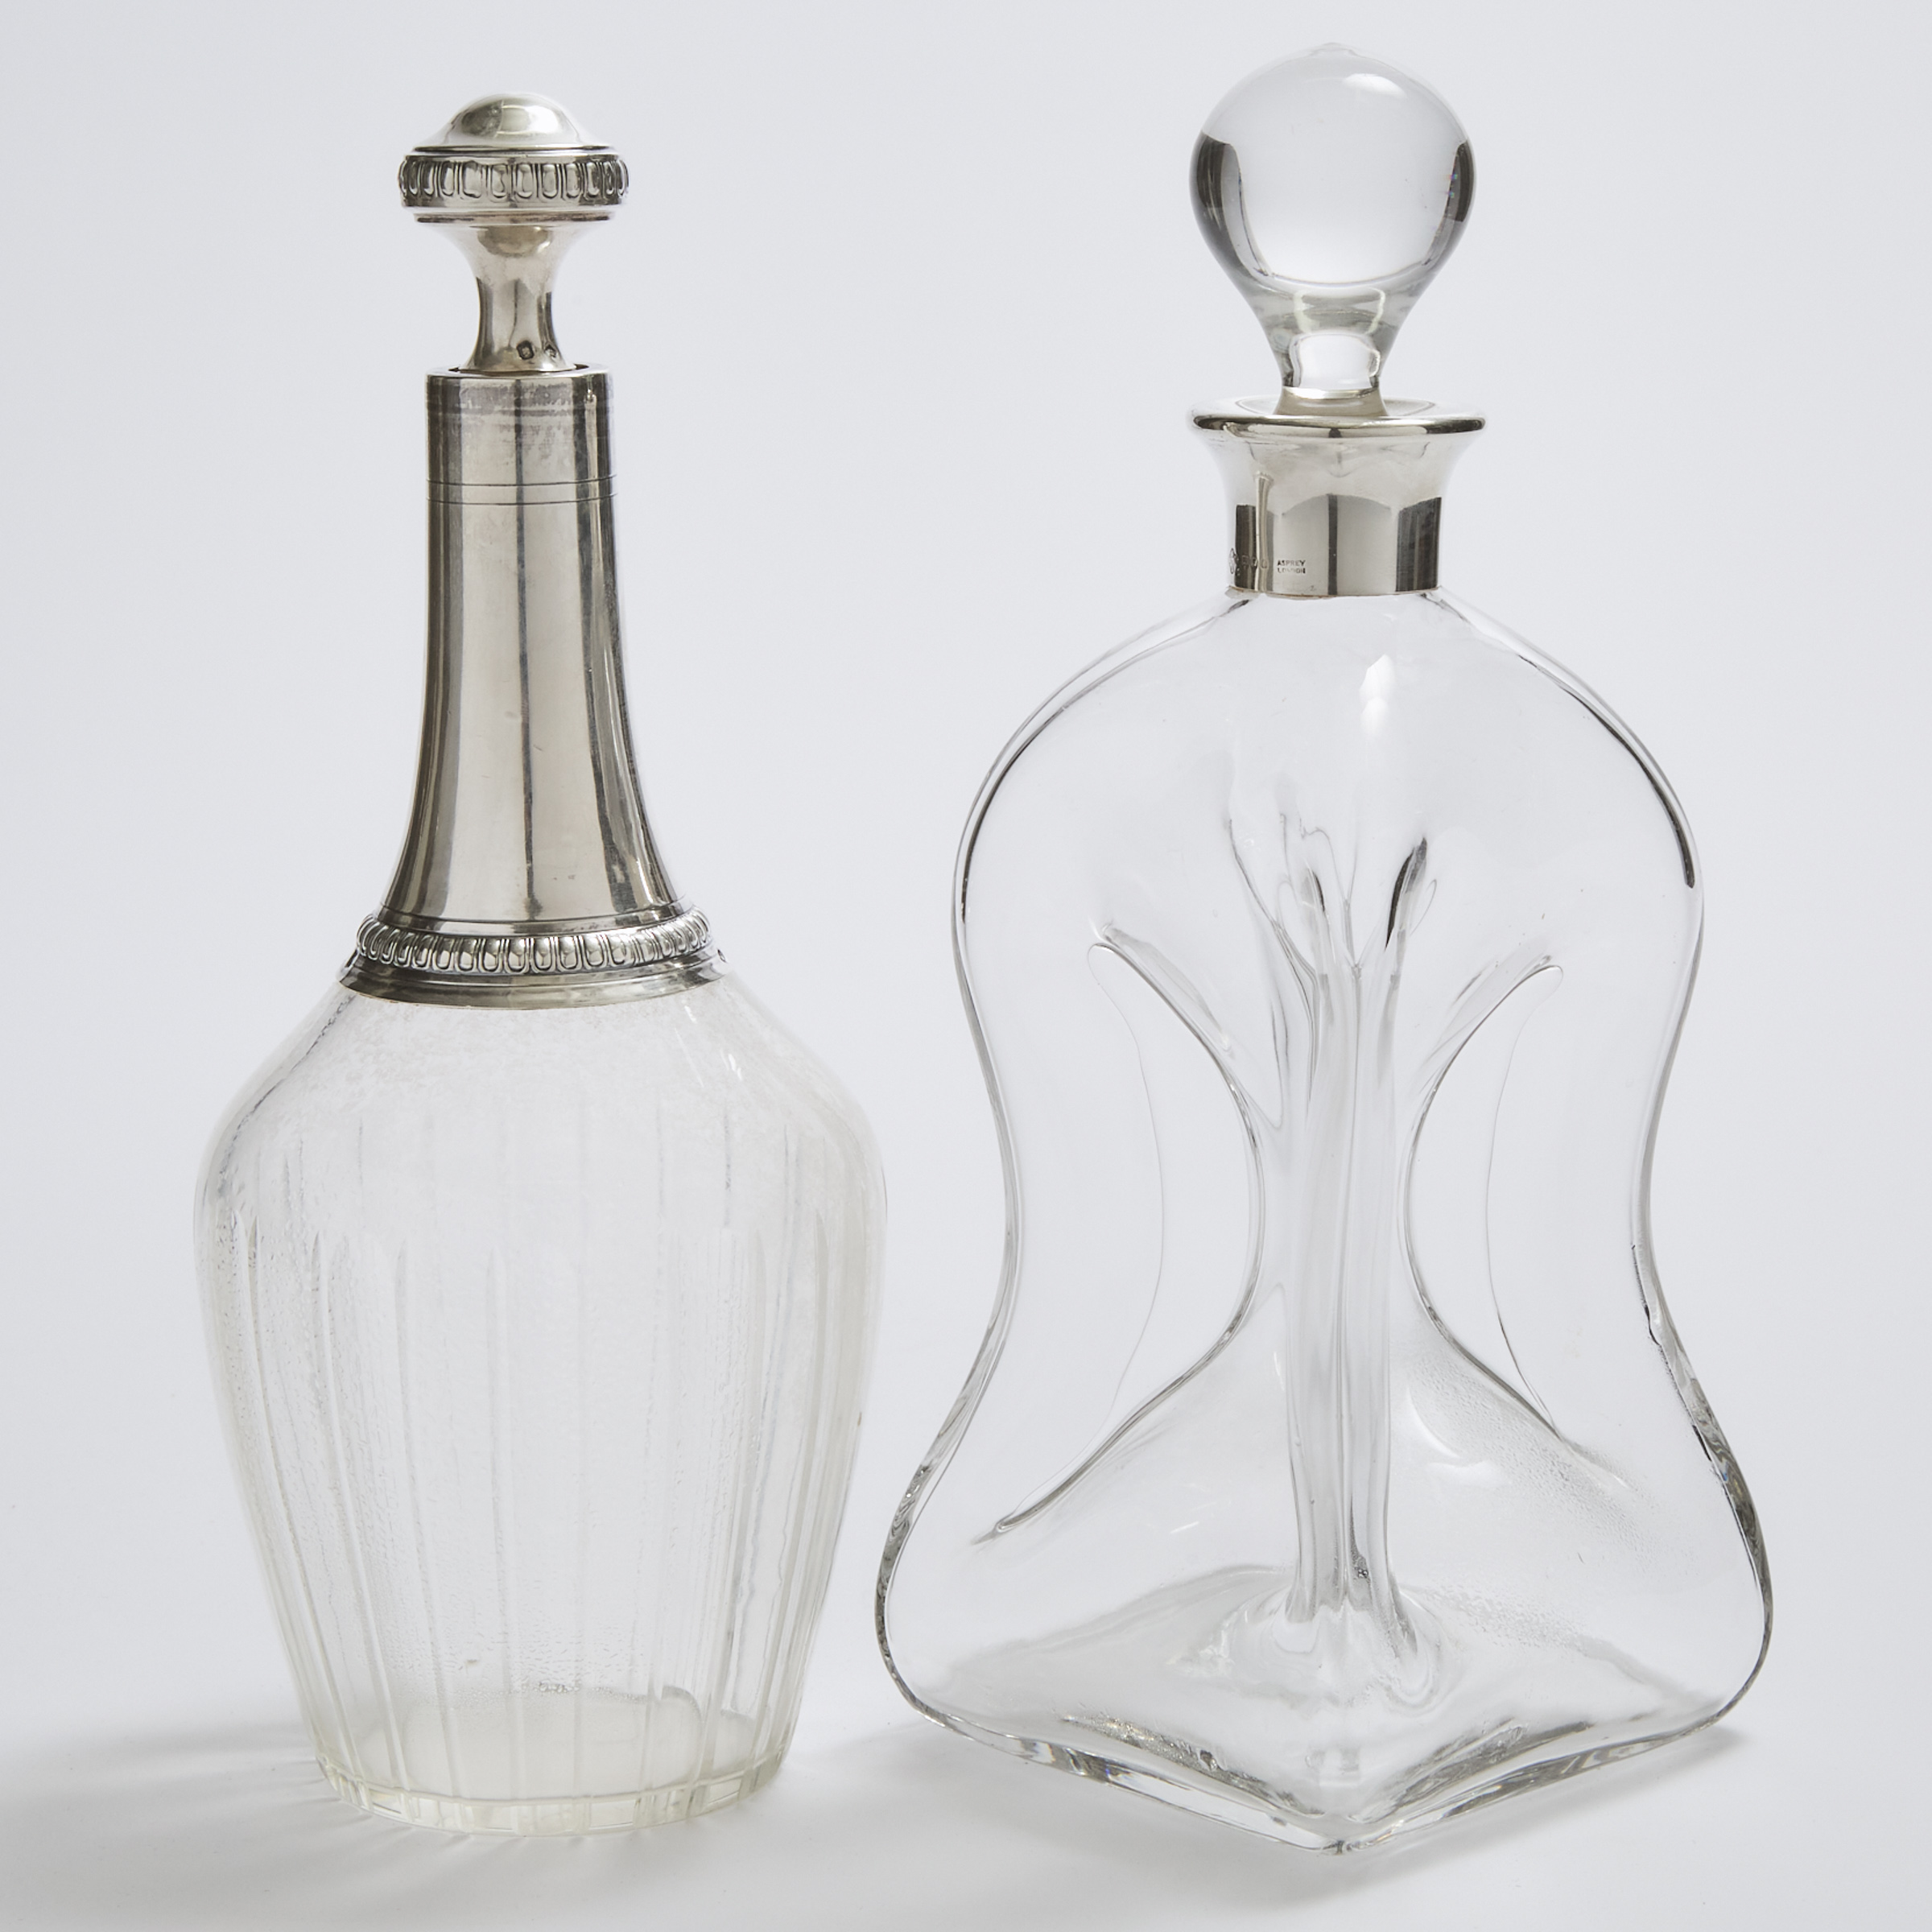 Two French or English Silver Mounted Glass Decanters, Charles Tirbour, Paris and Asprey & Co., London, 20th century